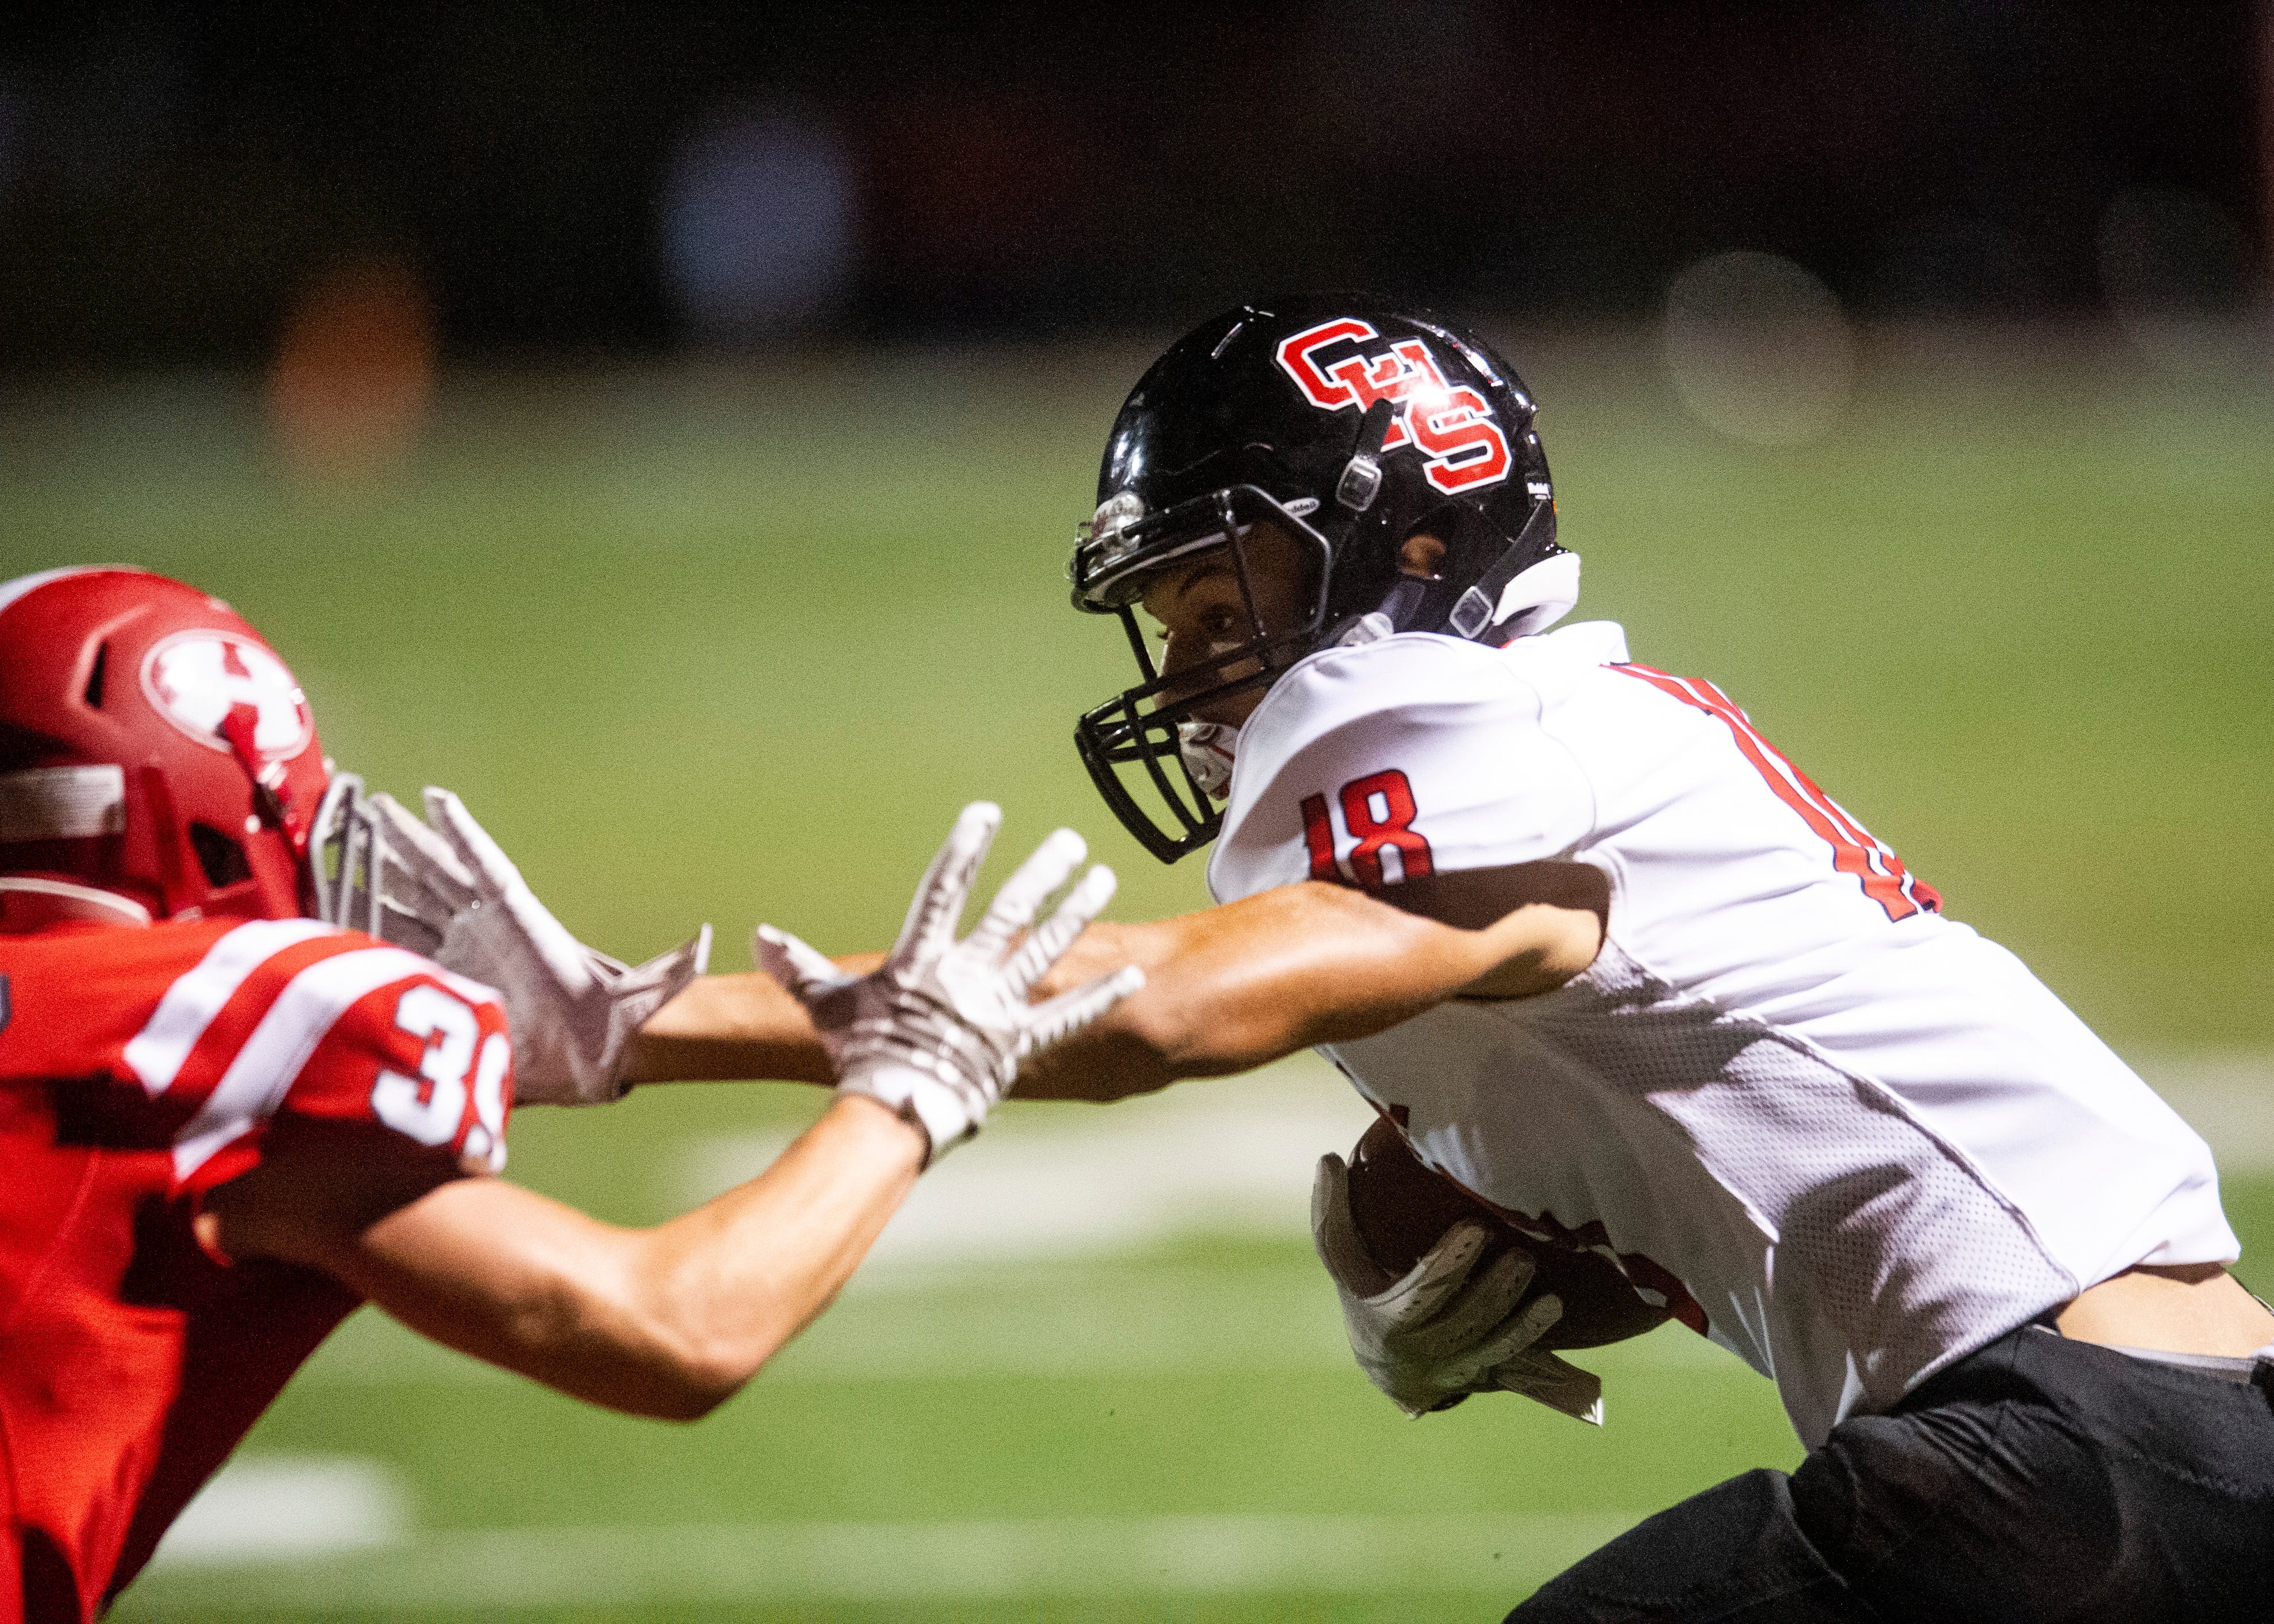 Central's Isaiah Osborne (18) pushes away Halls' Caden Stephens (39) during the Halls and Central high school football game on Friday, October 4, 2019 at Halls High School.